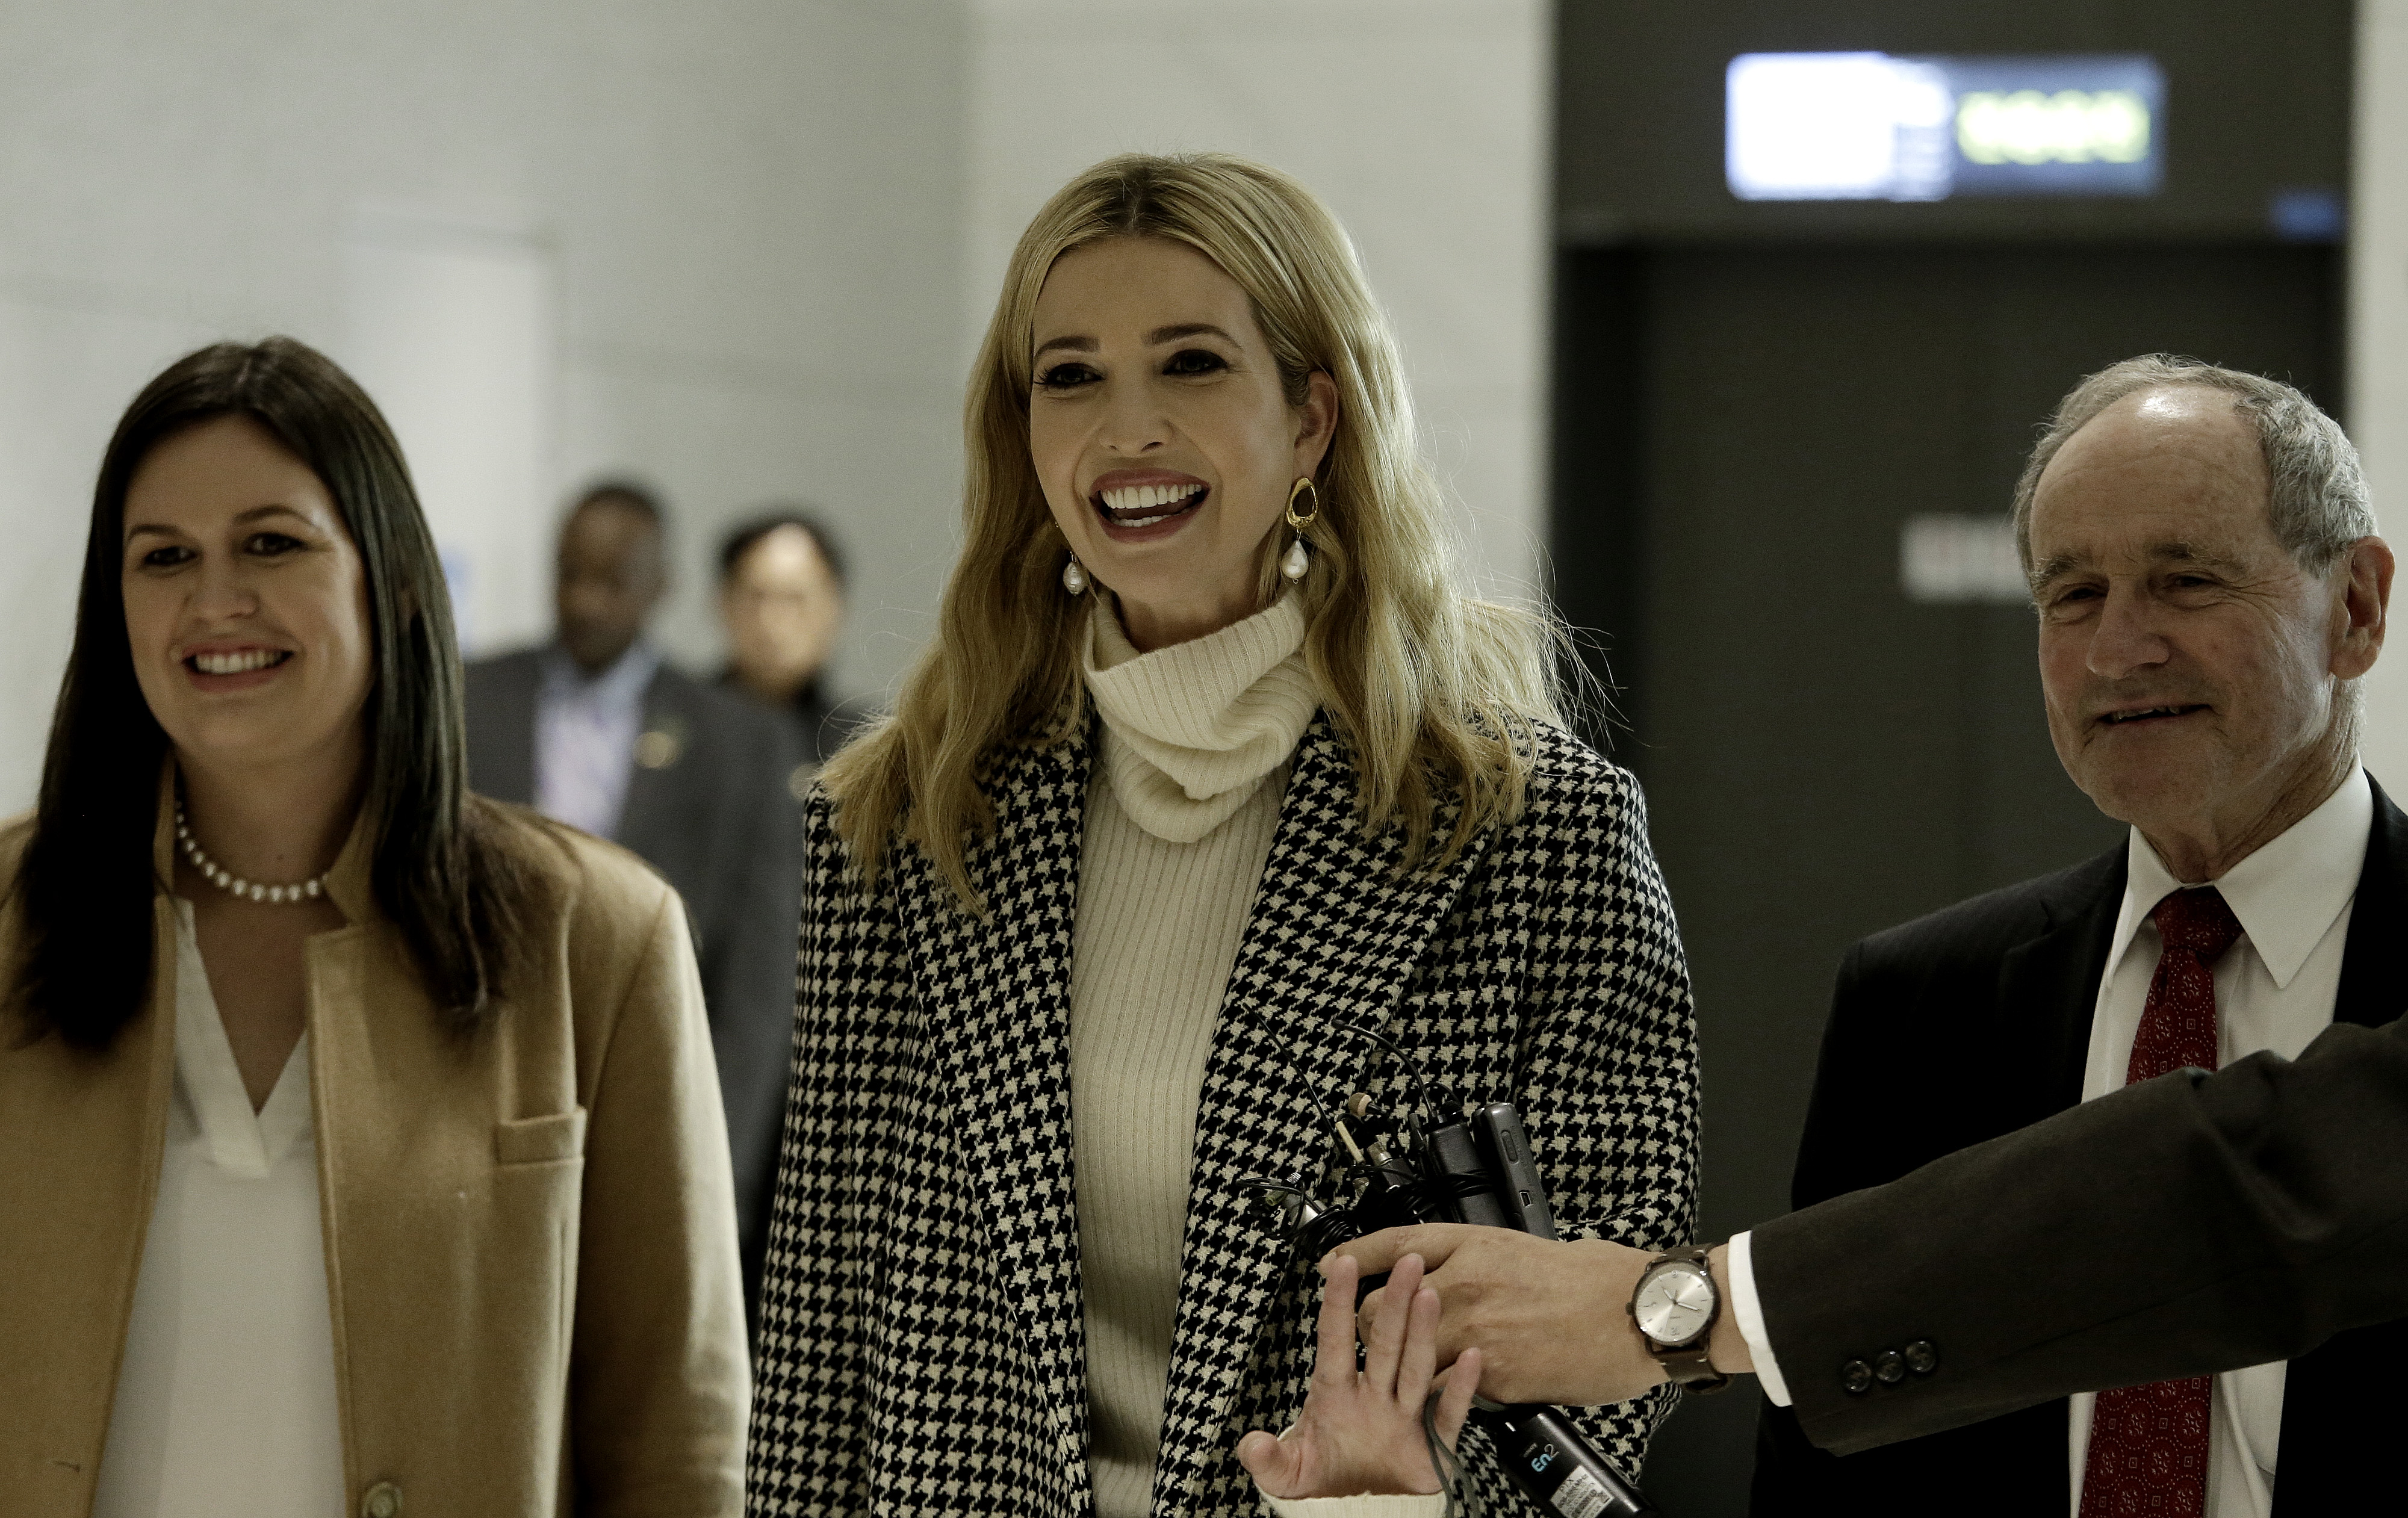 Ivanka Trump, advisor to and daughter of U.S. President Donald Trump, arrives at Incheon International Airport on February 23, 2018 in Seoul, South Korea (Pool - Getty Images)